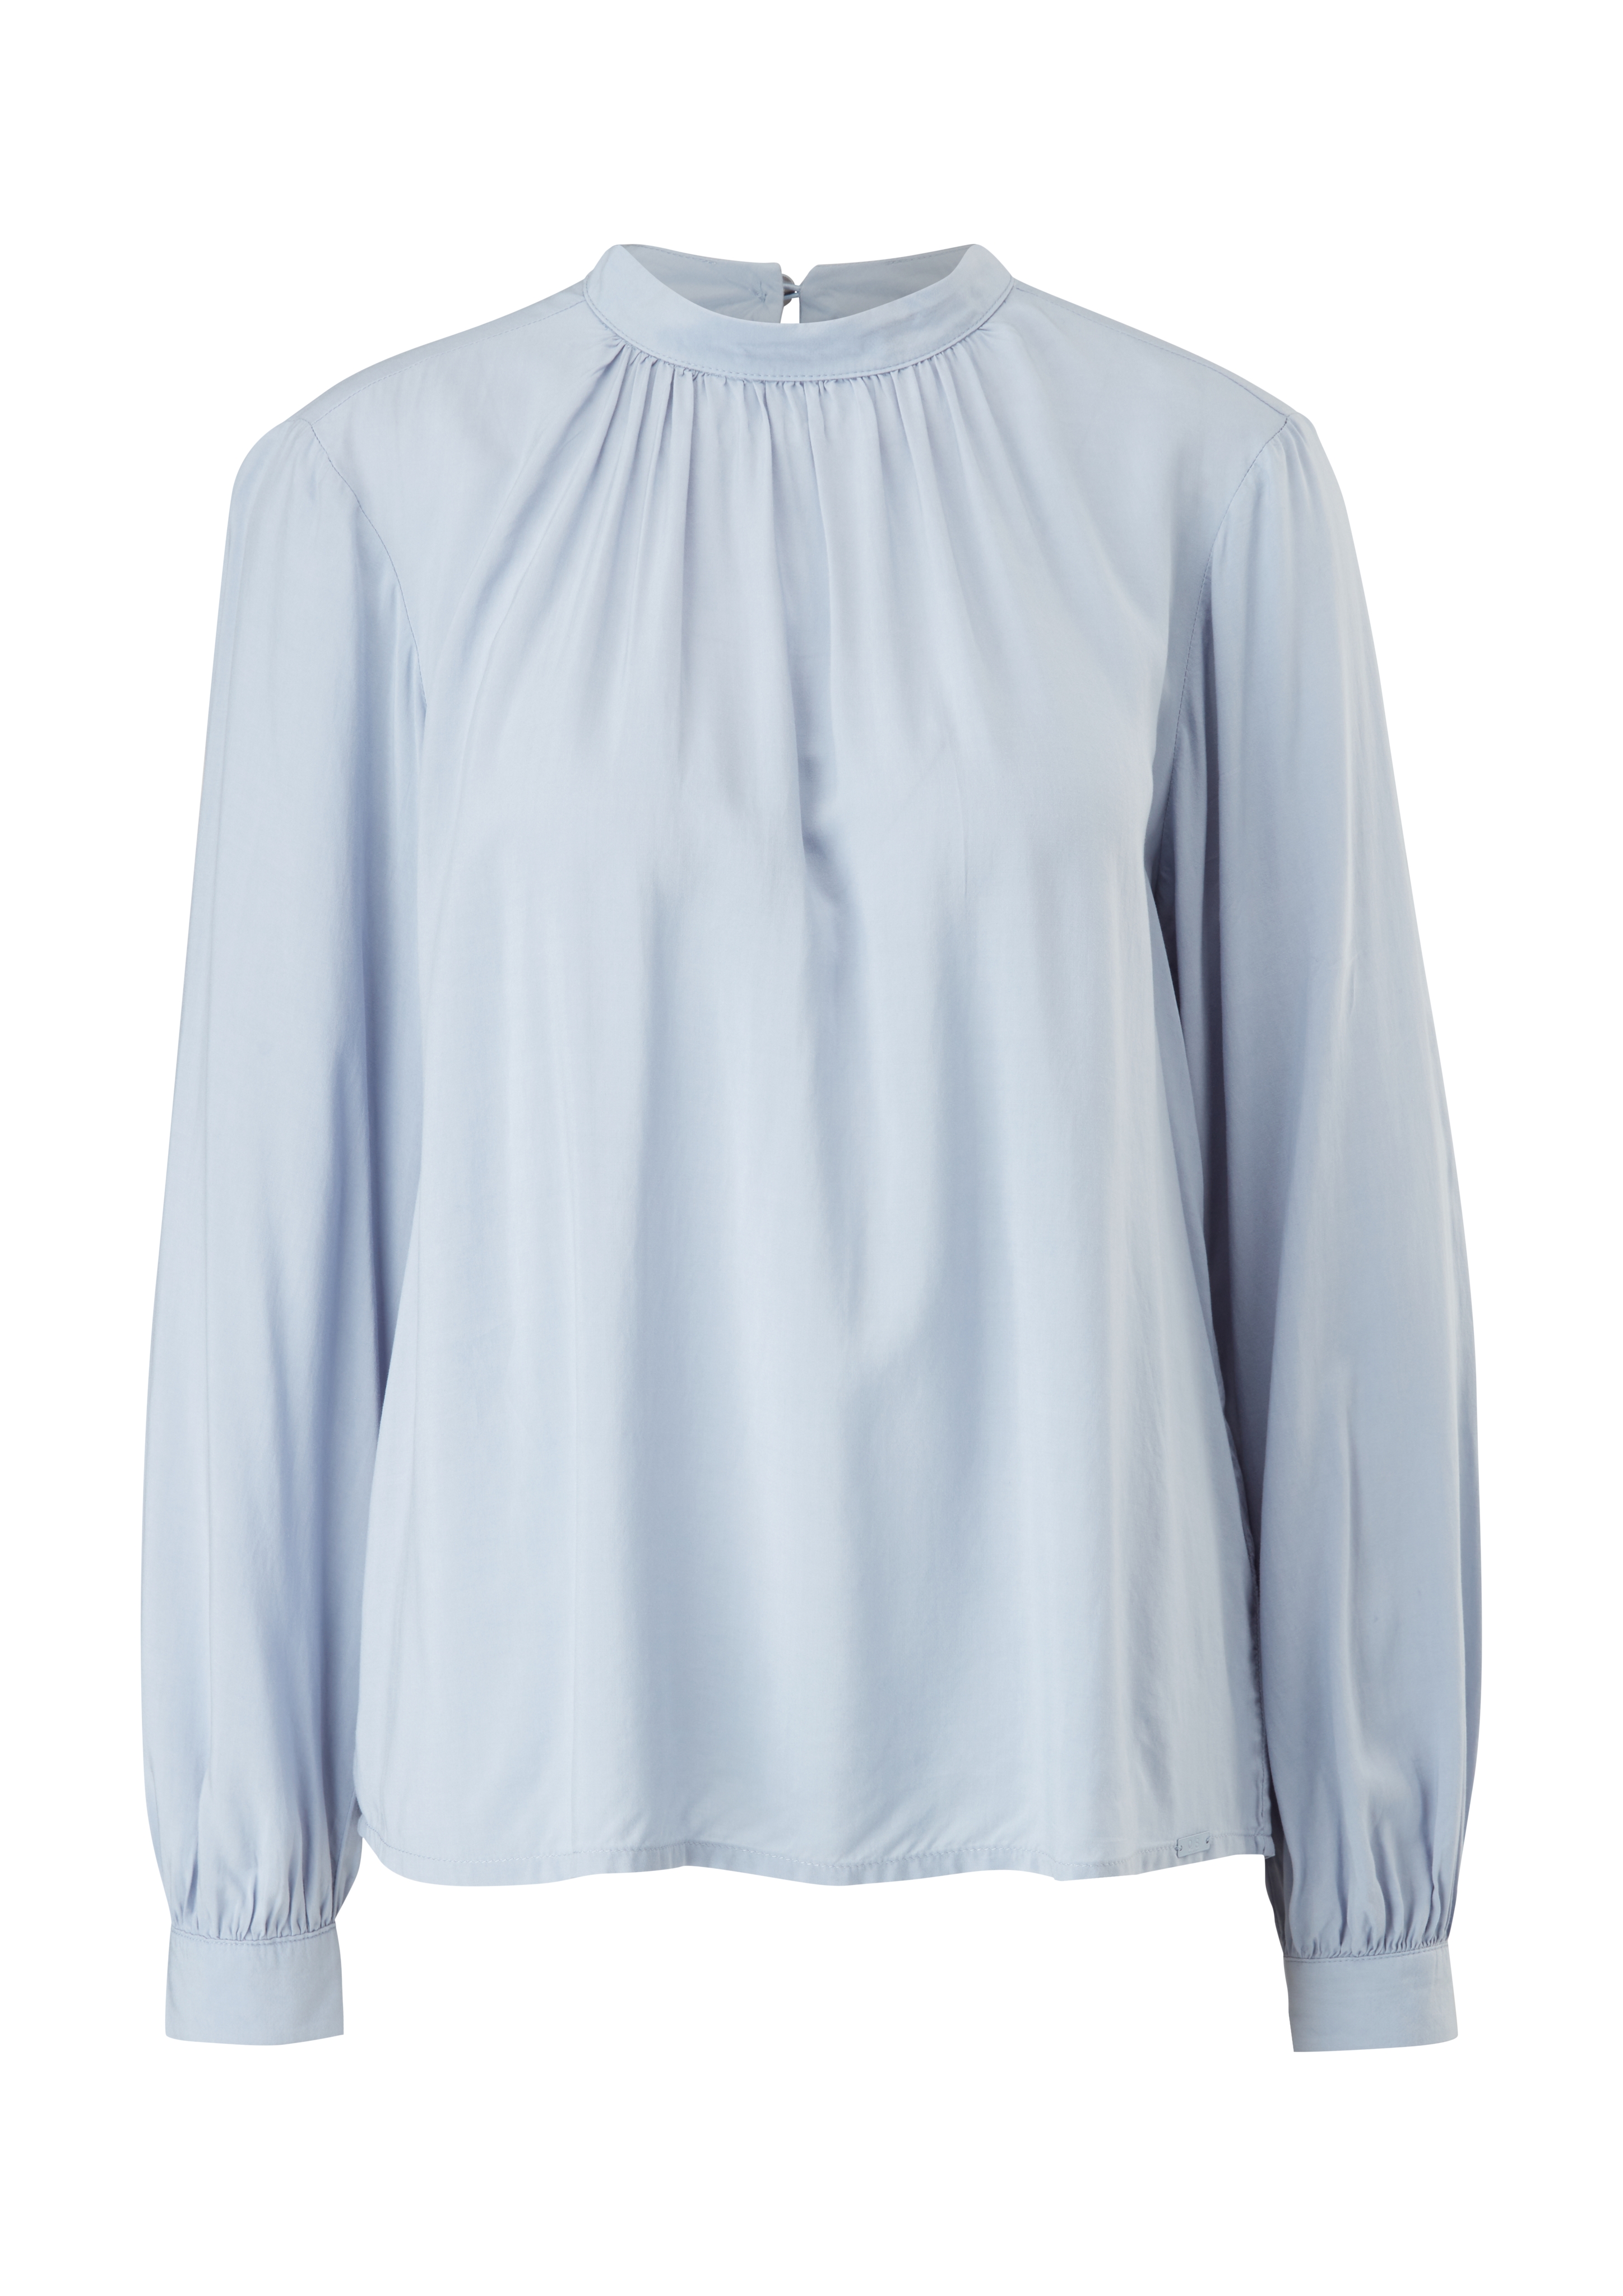 Q/S by s.Oliver Bluse in Hellblau 